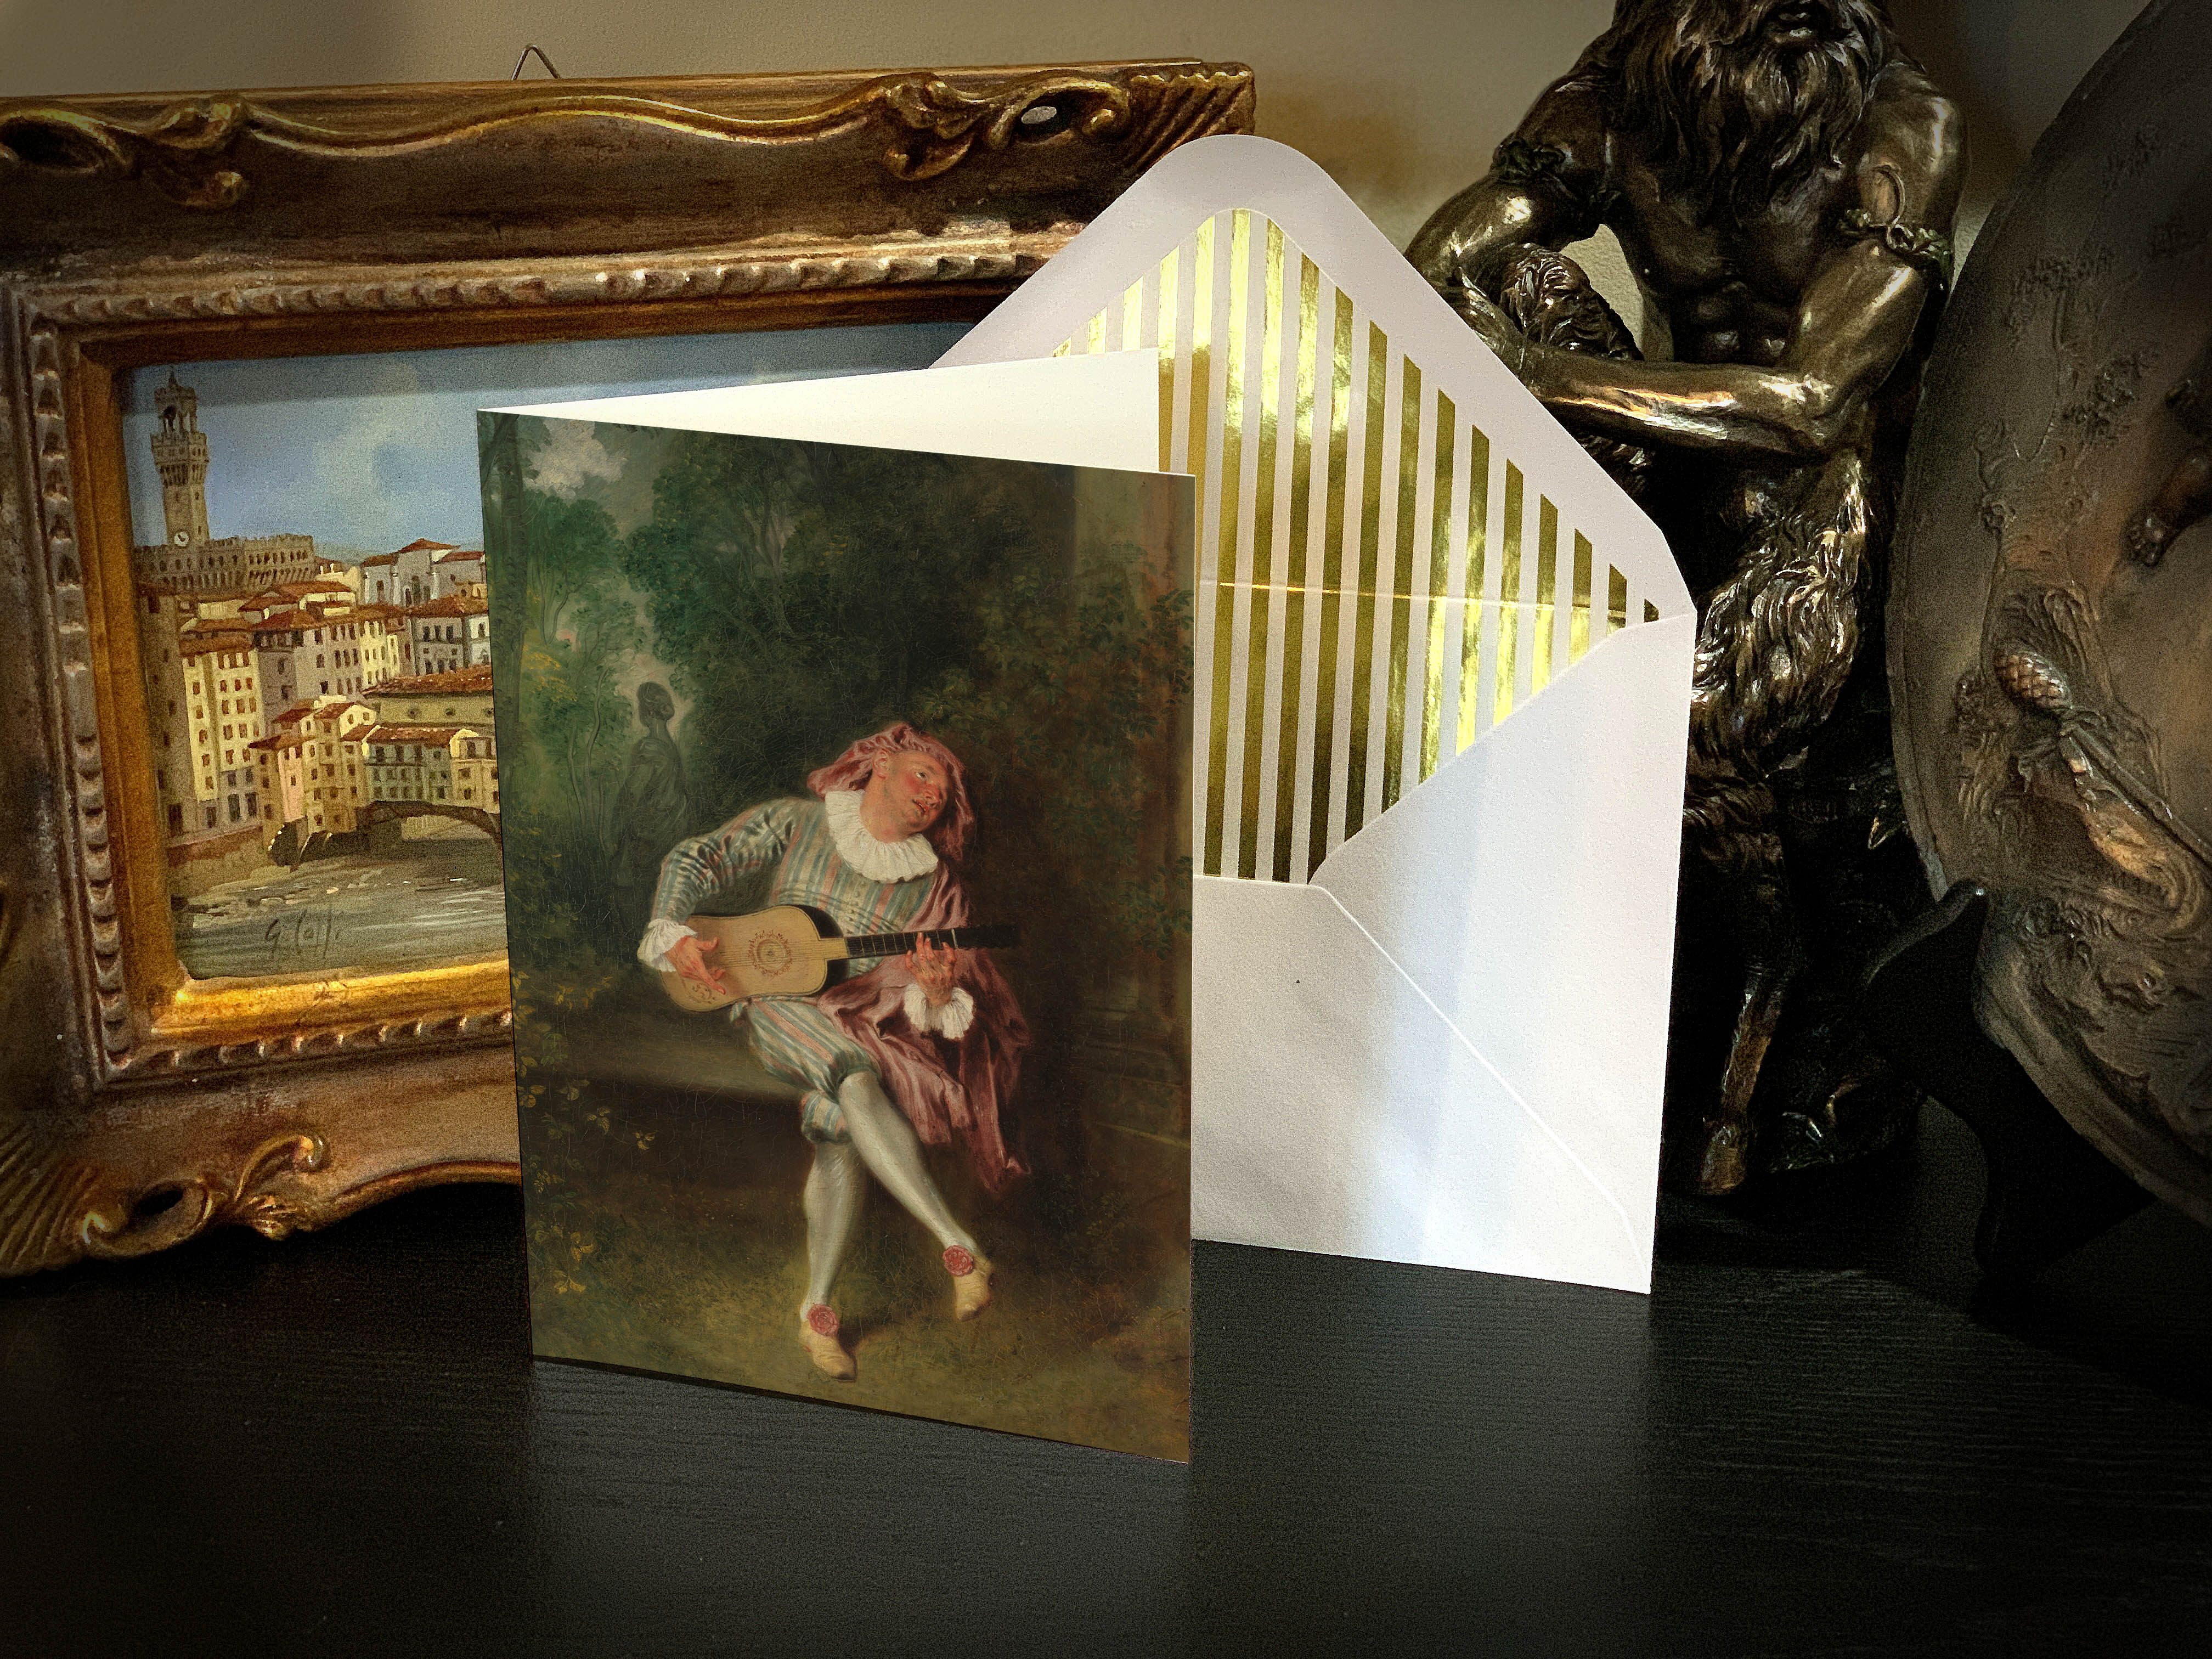 Romantic Interludes, Everyday Fine Art Greeting Cards with Elegant Striped Gold Foil Envelopes, 5in x 7in, 5 Cards/5 Envelopes